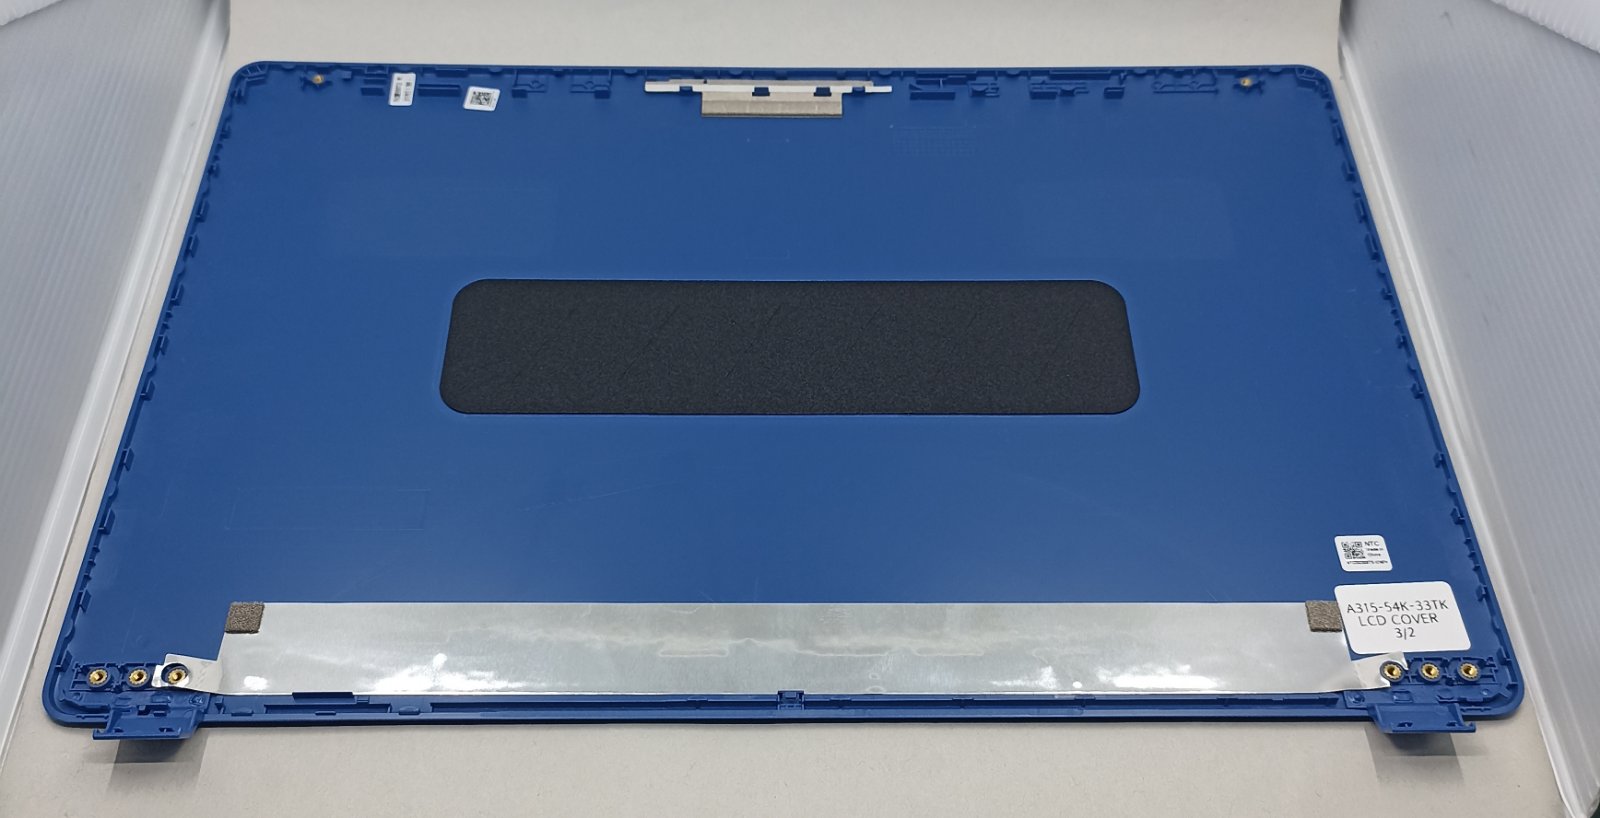 Replacement LCD Cover for Acer A315-54K WL